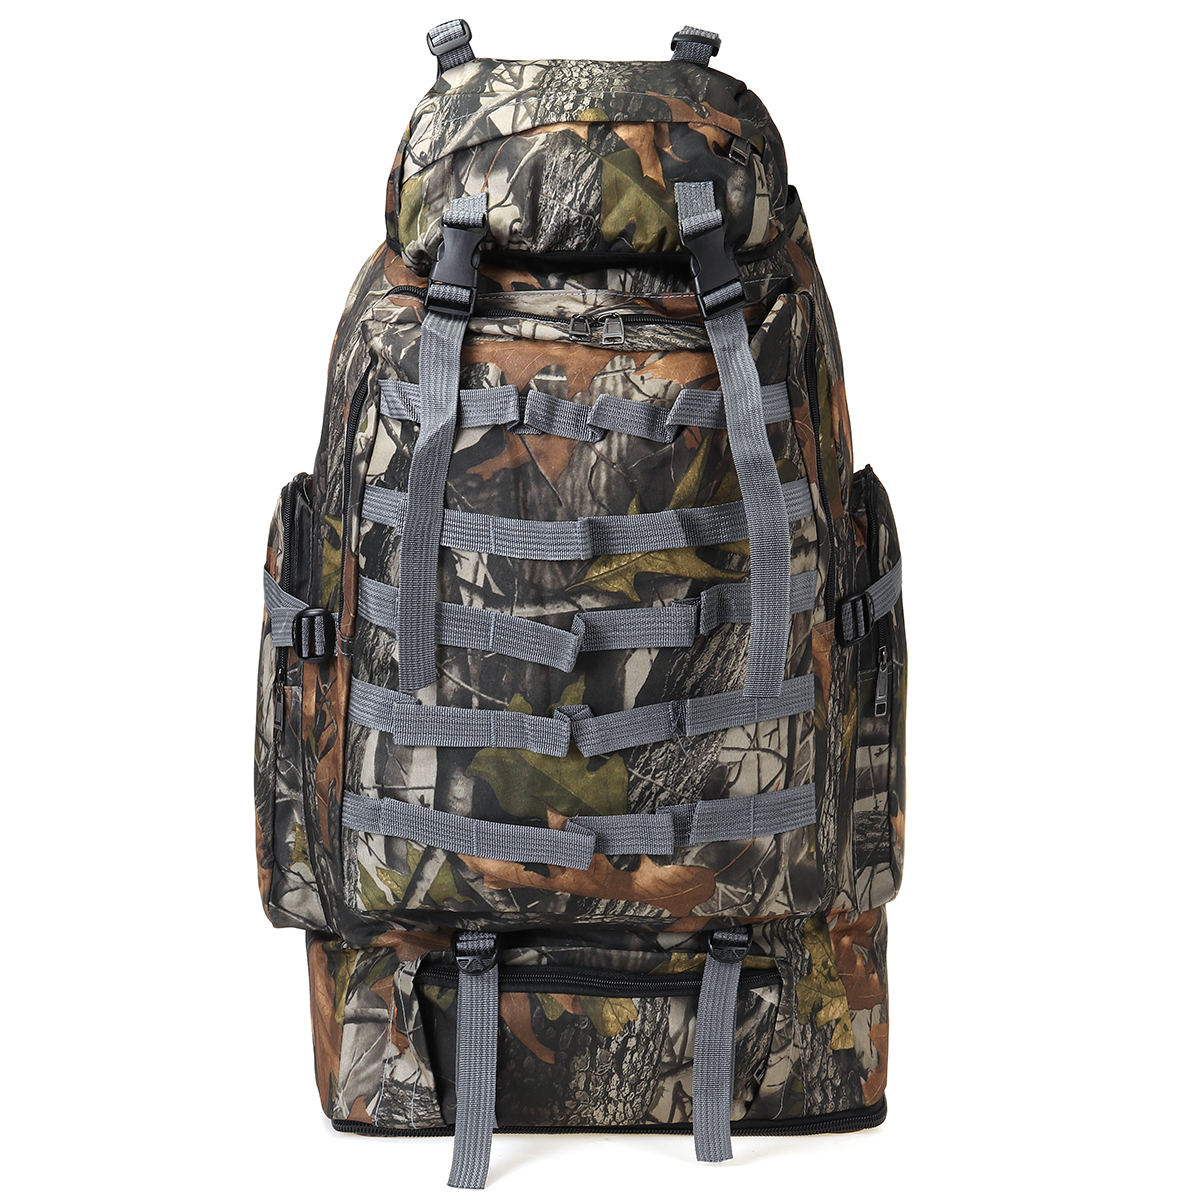 90-100L-Military-Tactical-Backpack-Waterproof-Molle-Climbing-Bag-Outdoor-Trekking-Camping-1865666-4